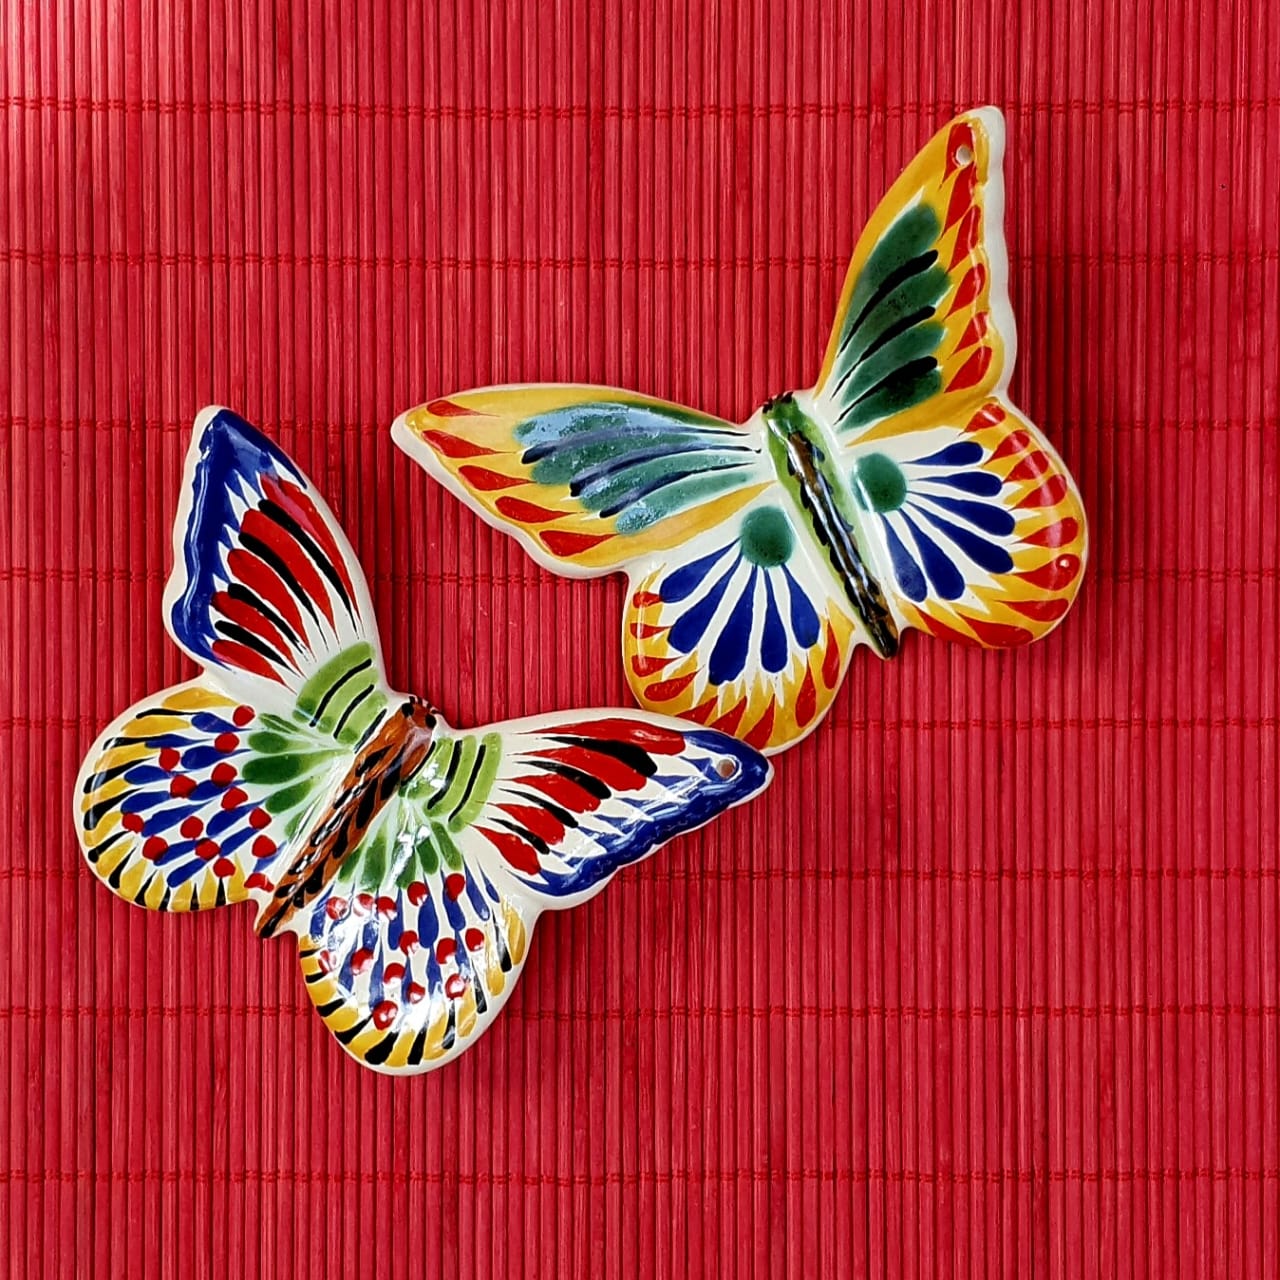 The Christmas Butterfly Ornament Pattern